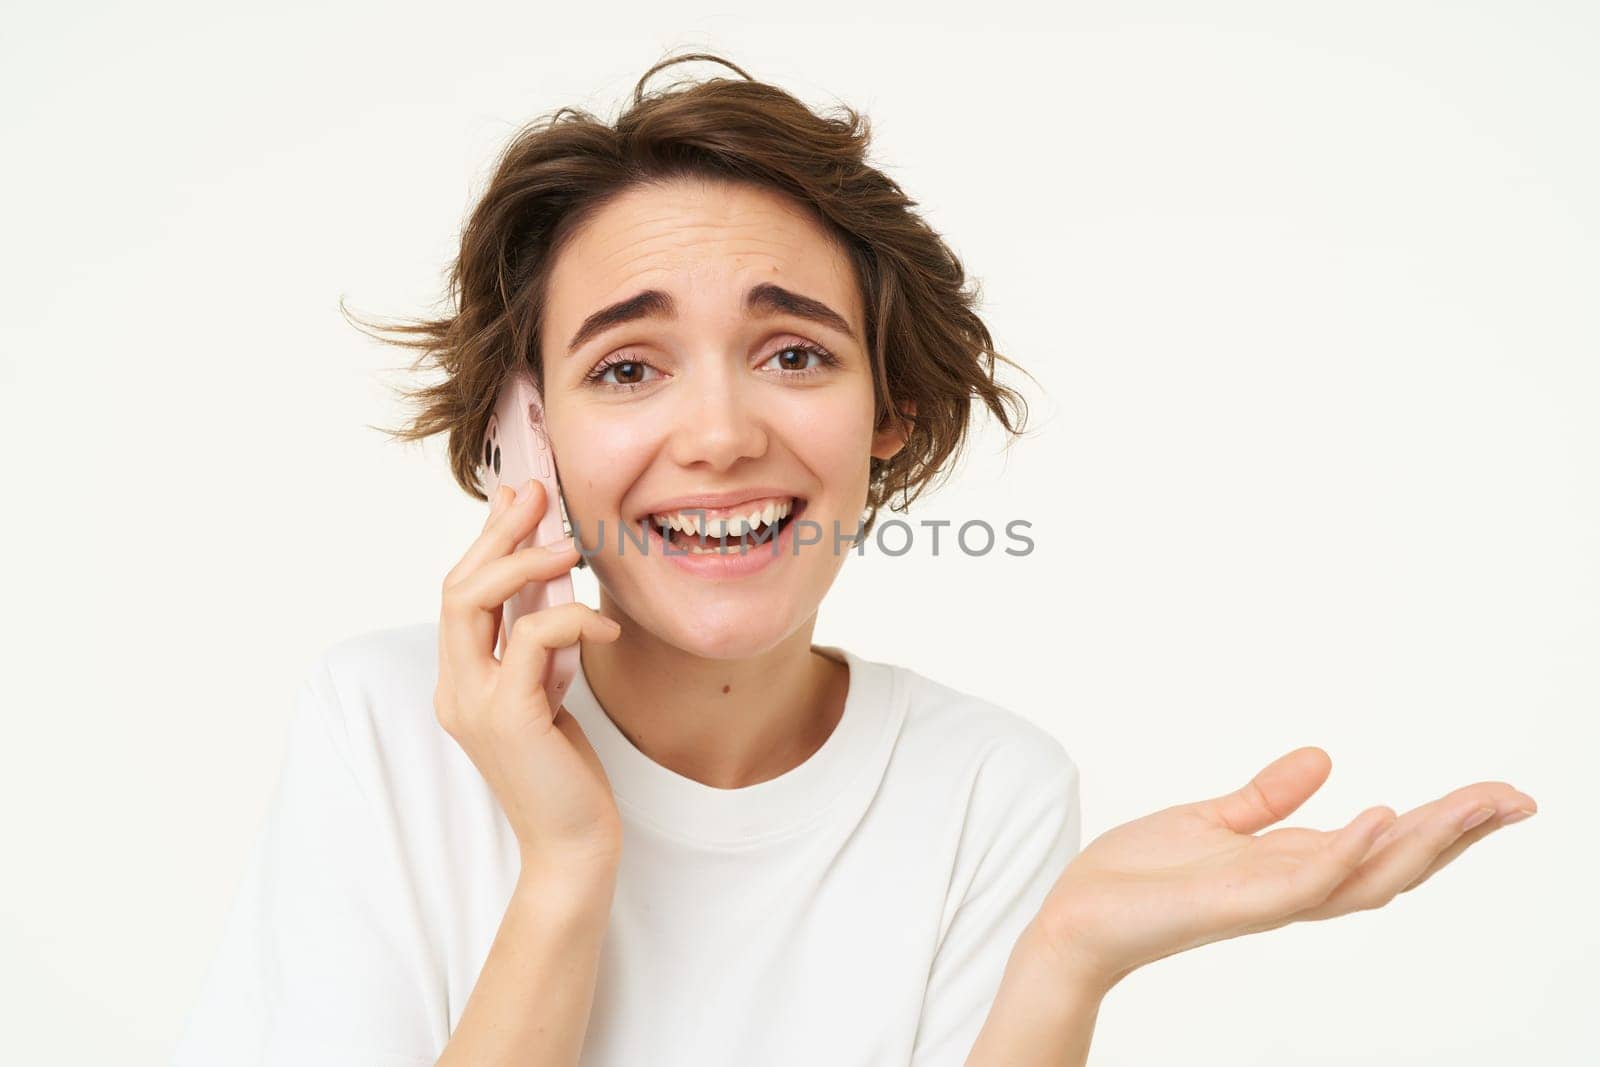 Image of smiling, brunette woman calling someone, talking on mobile phone, answer telephone call, standing over white background.